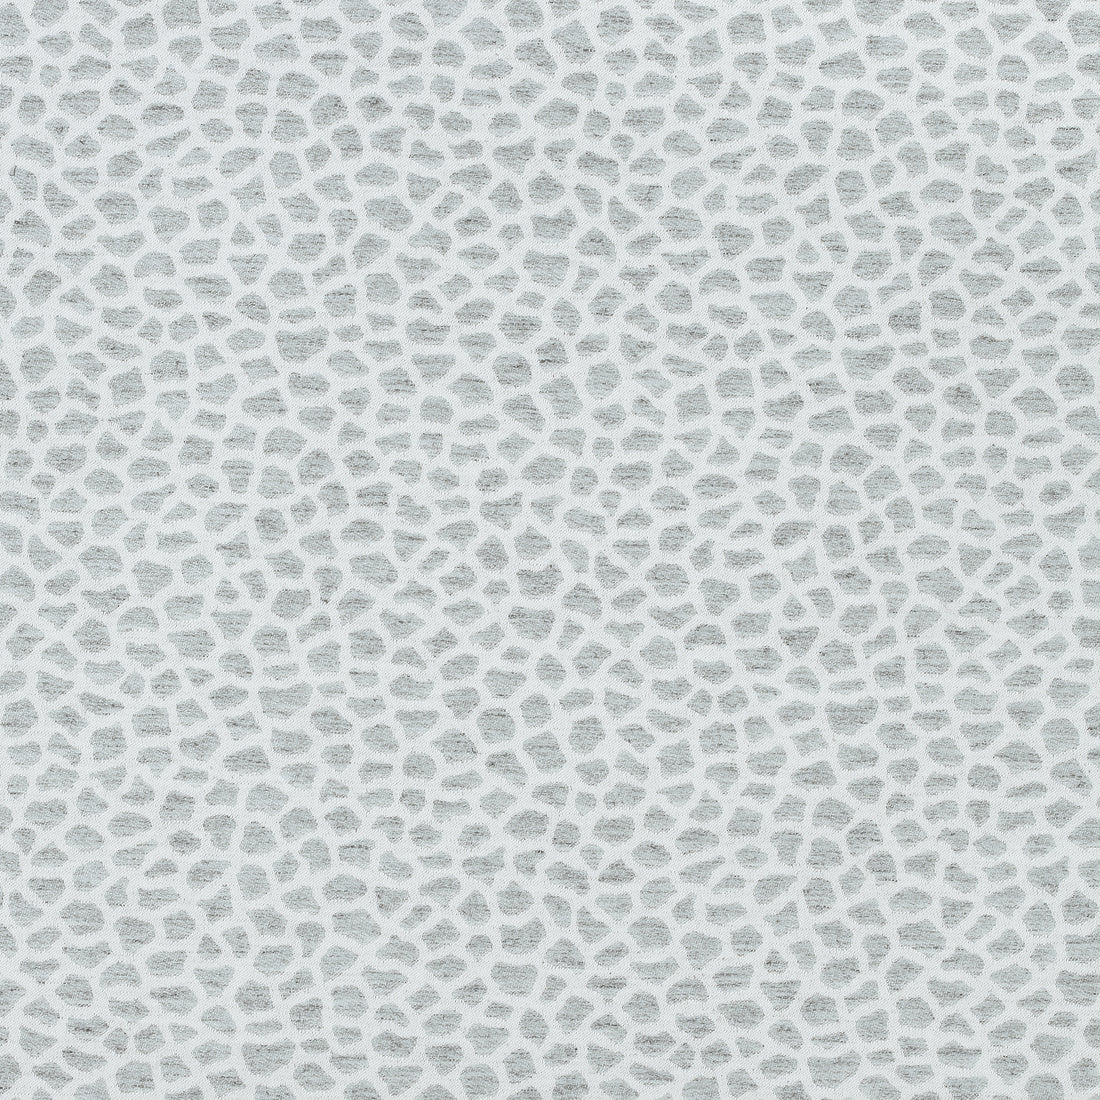 Masai fabric in fog color - pattern number W80421 - by Thibaut in the Woven Resource Vol 10 Menagerie collection